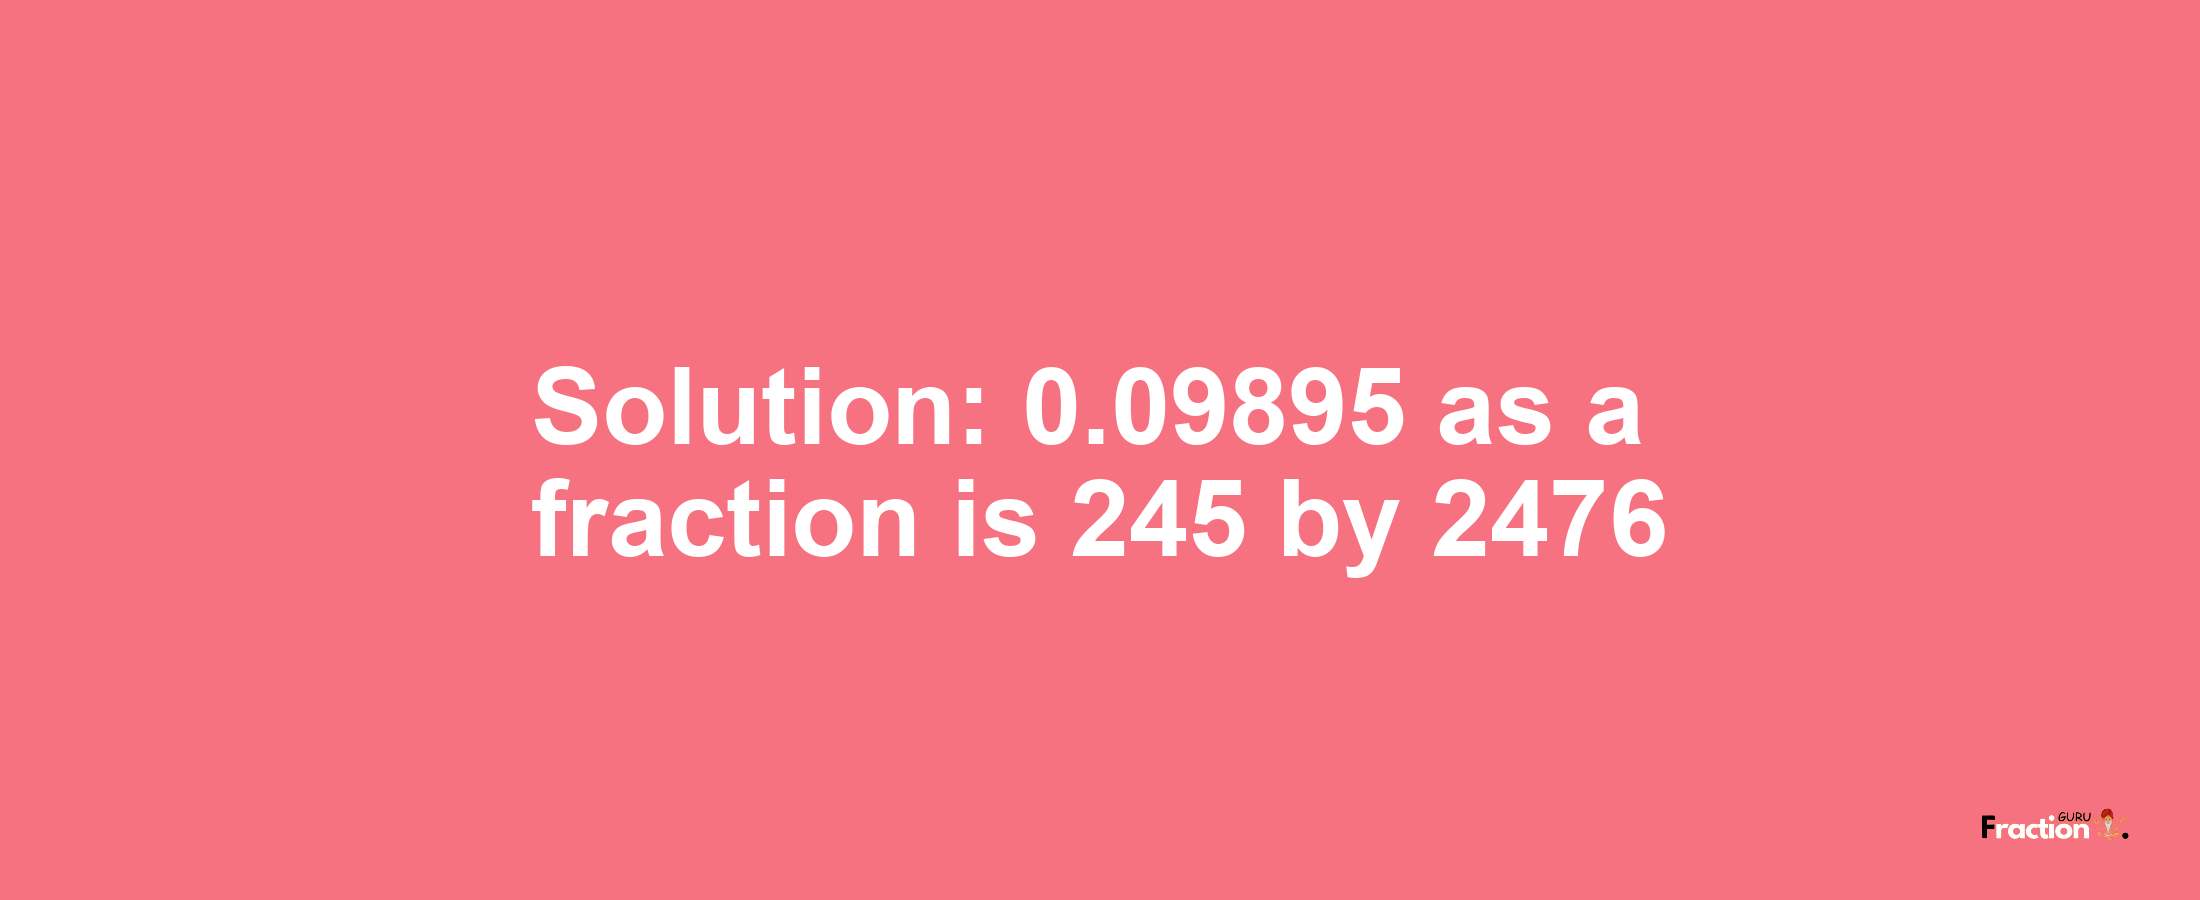 Solution:0.09895 as a fraction is 245/2476